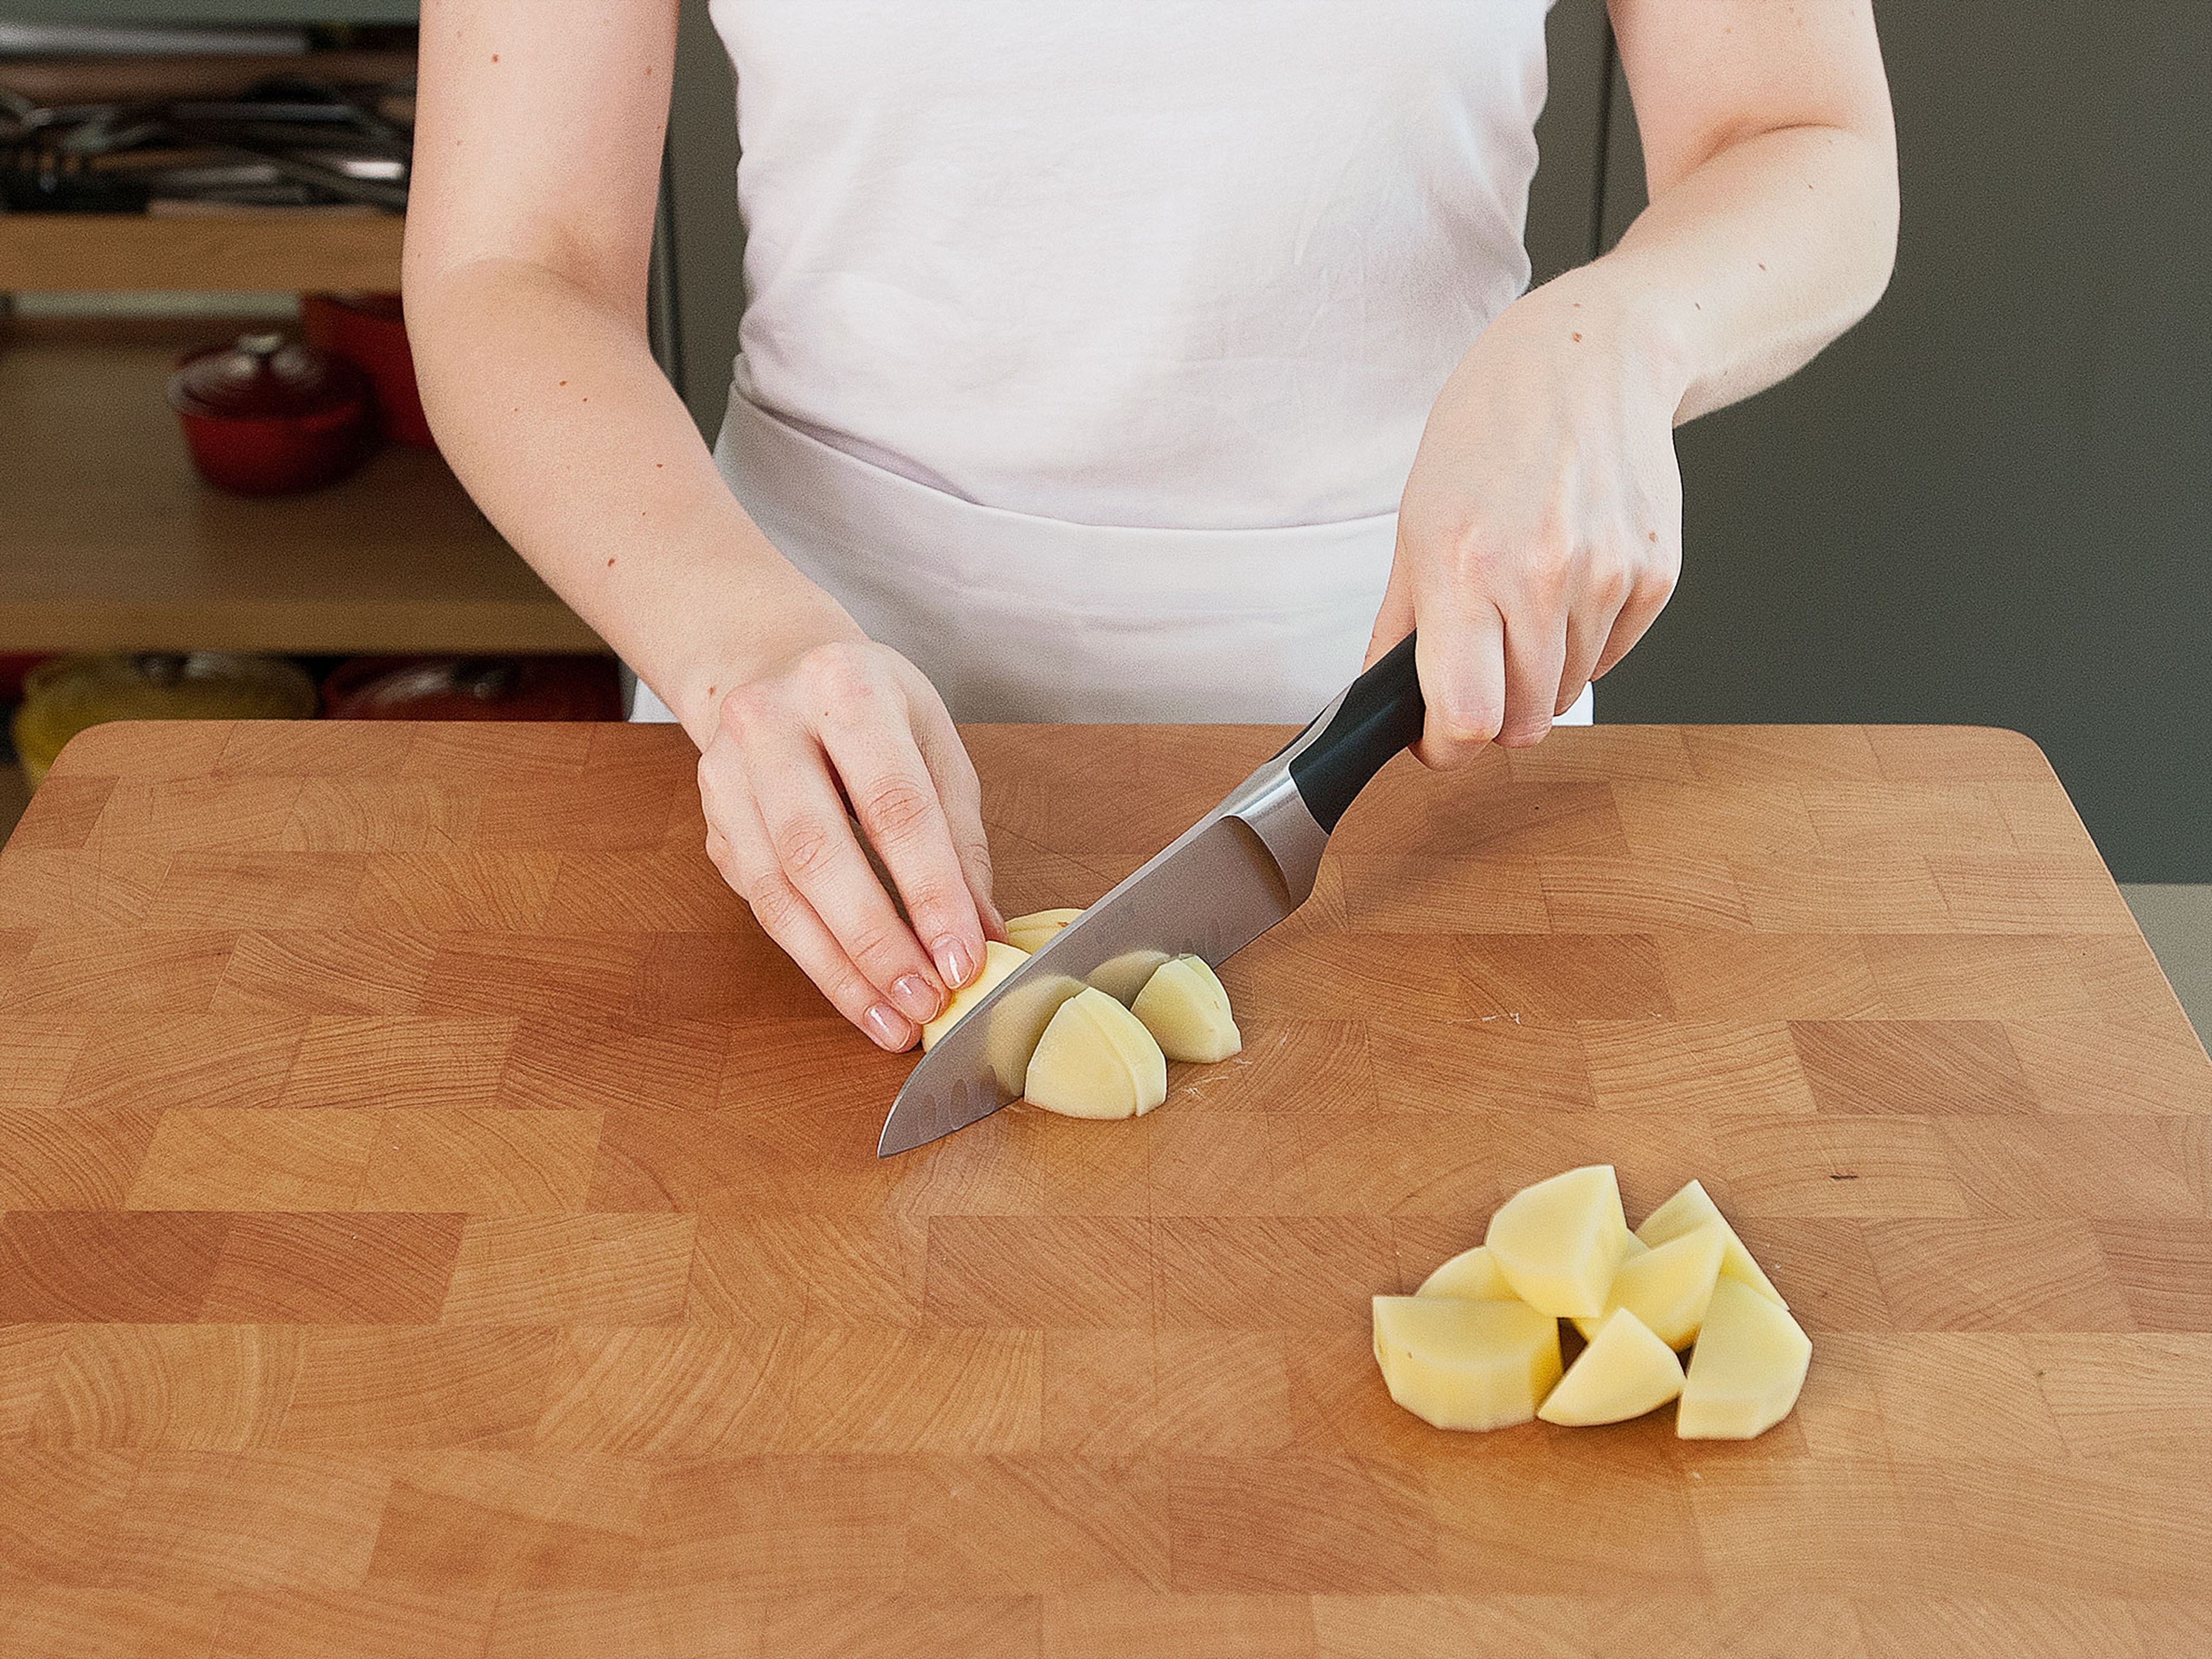 Meanwhile, peel potatoes and cut into large pieces. In a large saucepan, bring potatoes to a boil in salted water and cook for approx. 15 – 20 min. Drain and set aside.